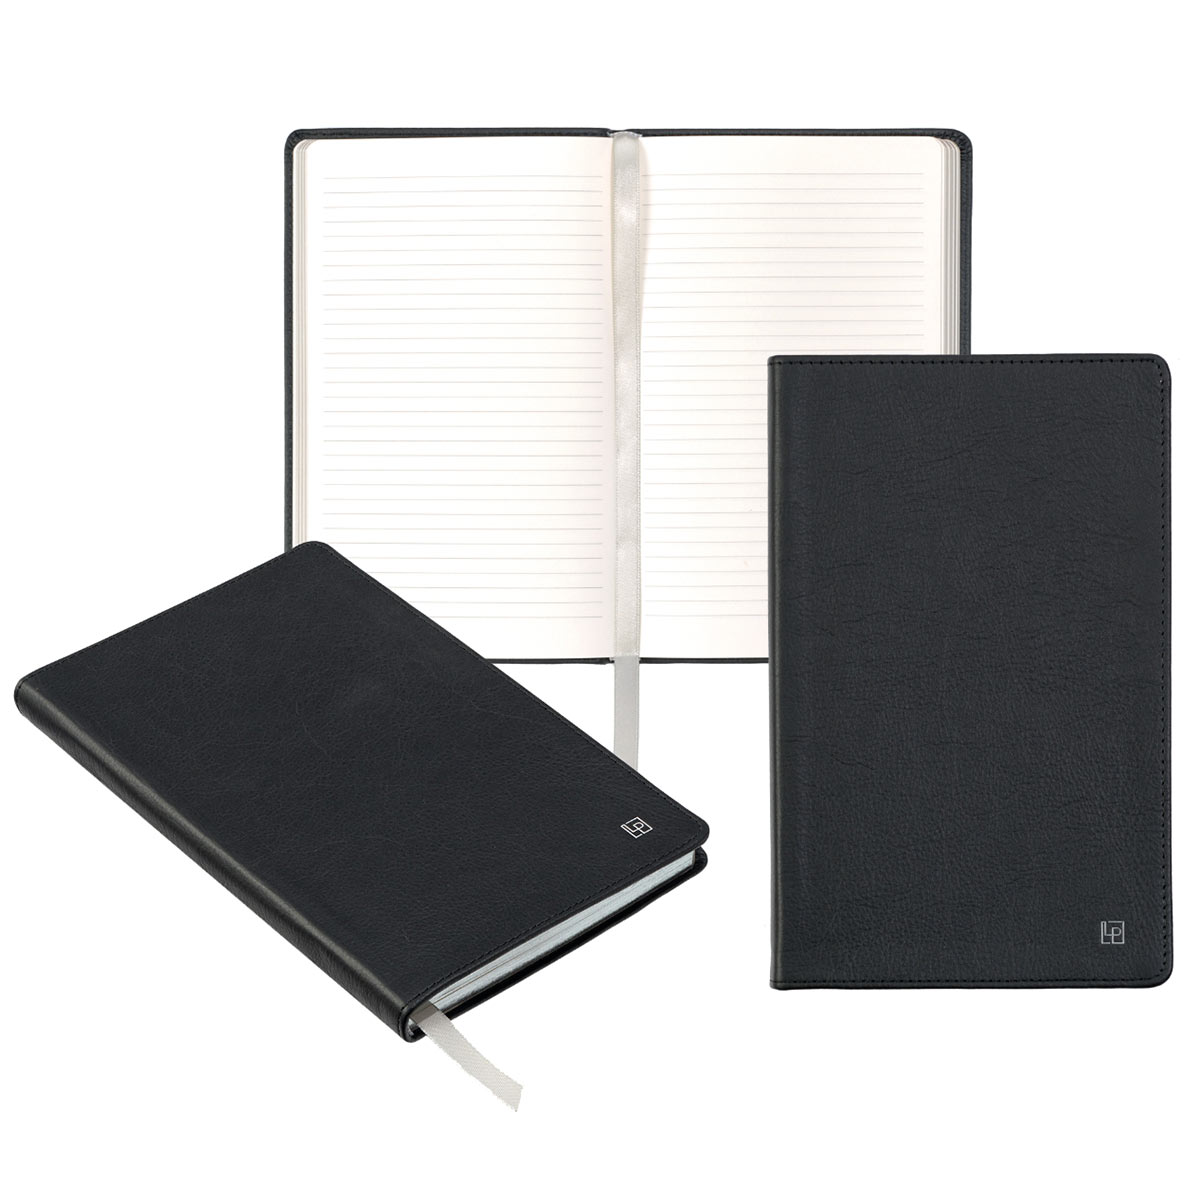 Three view collage of the Tuxedo Black journal, open with ribbon marker, front view, and angled closed view of binding and lower edge of notebook